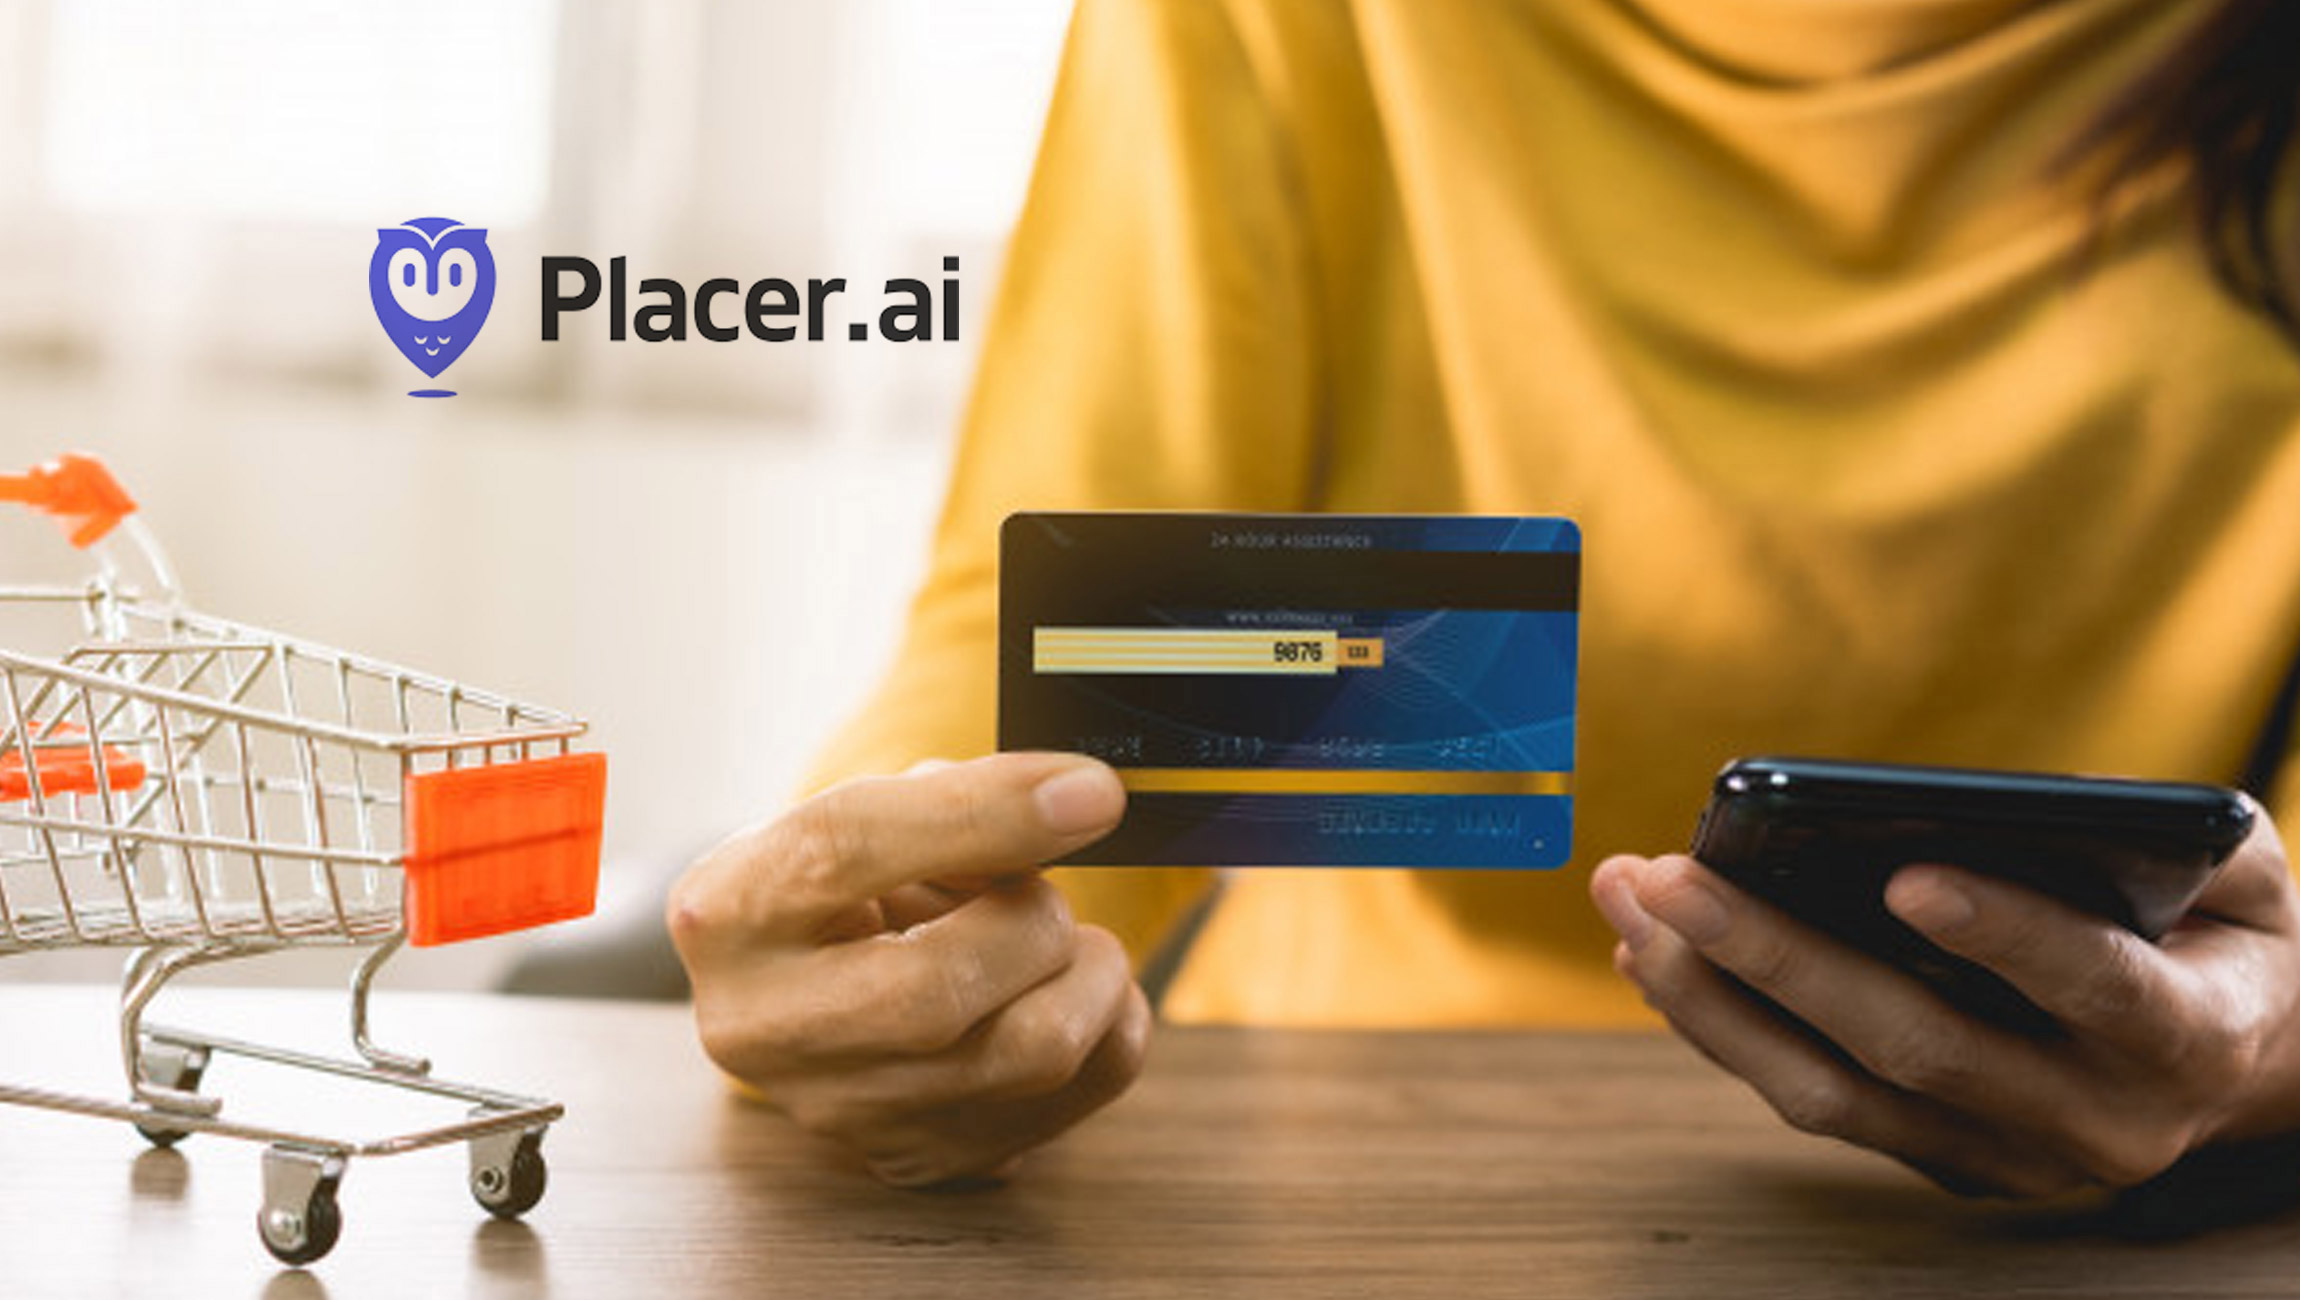 Placer.ai-Launches-Void-Analysis-Tool-to-Rapidly-Identify-the-Ideal-Tenants-for-Any-Retail-Space